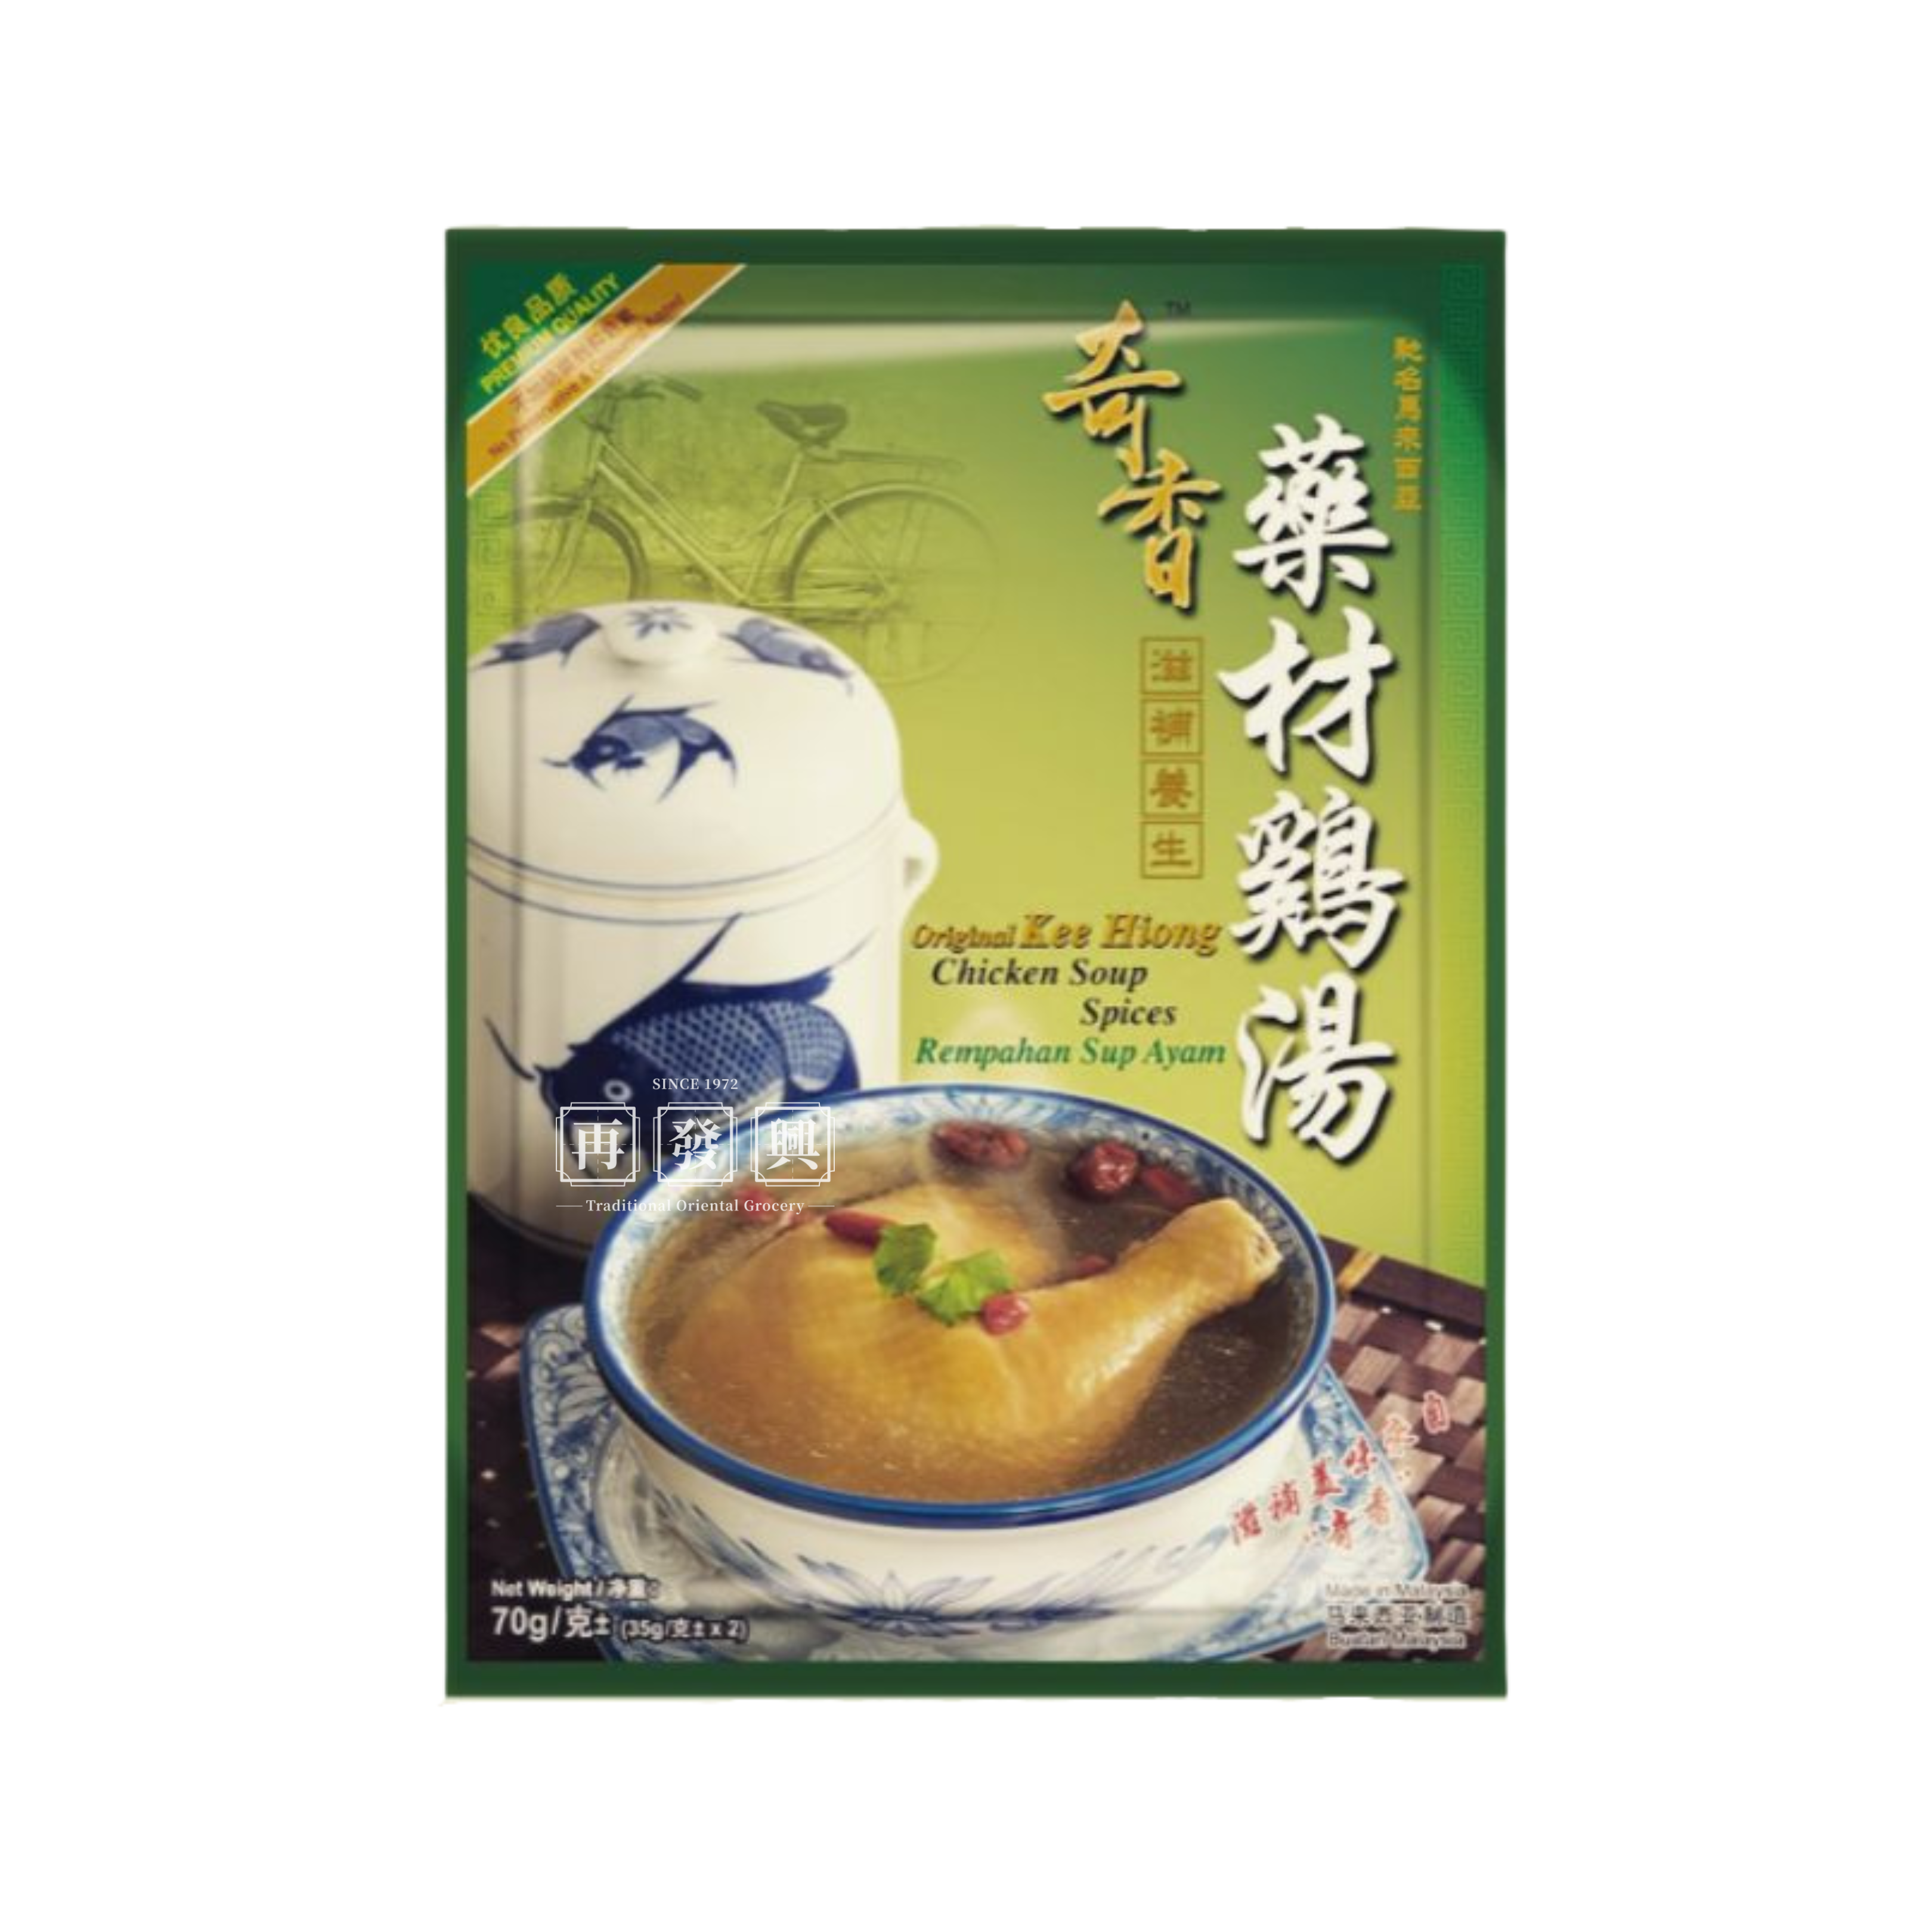 Kee Hiong Klang Chicken Soup Spices 70g